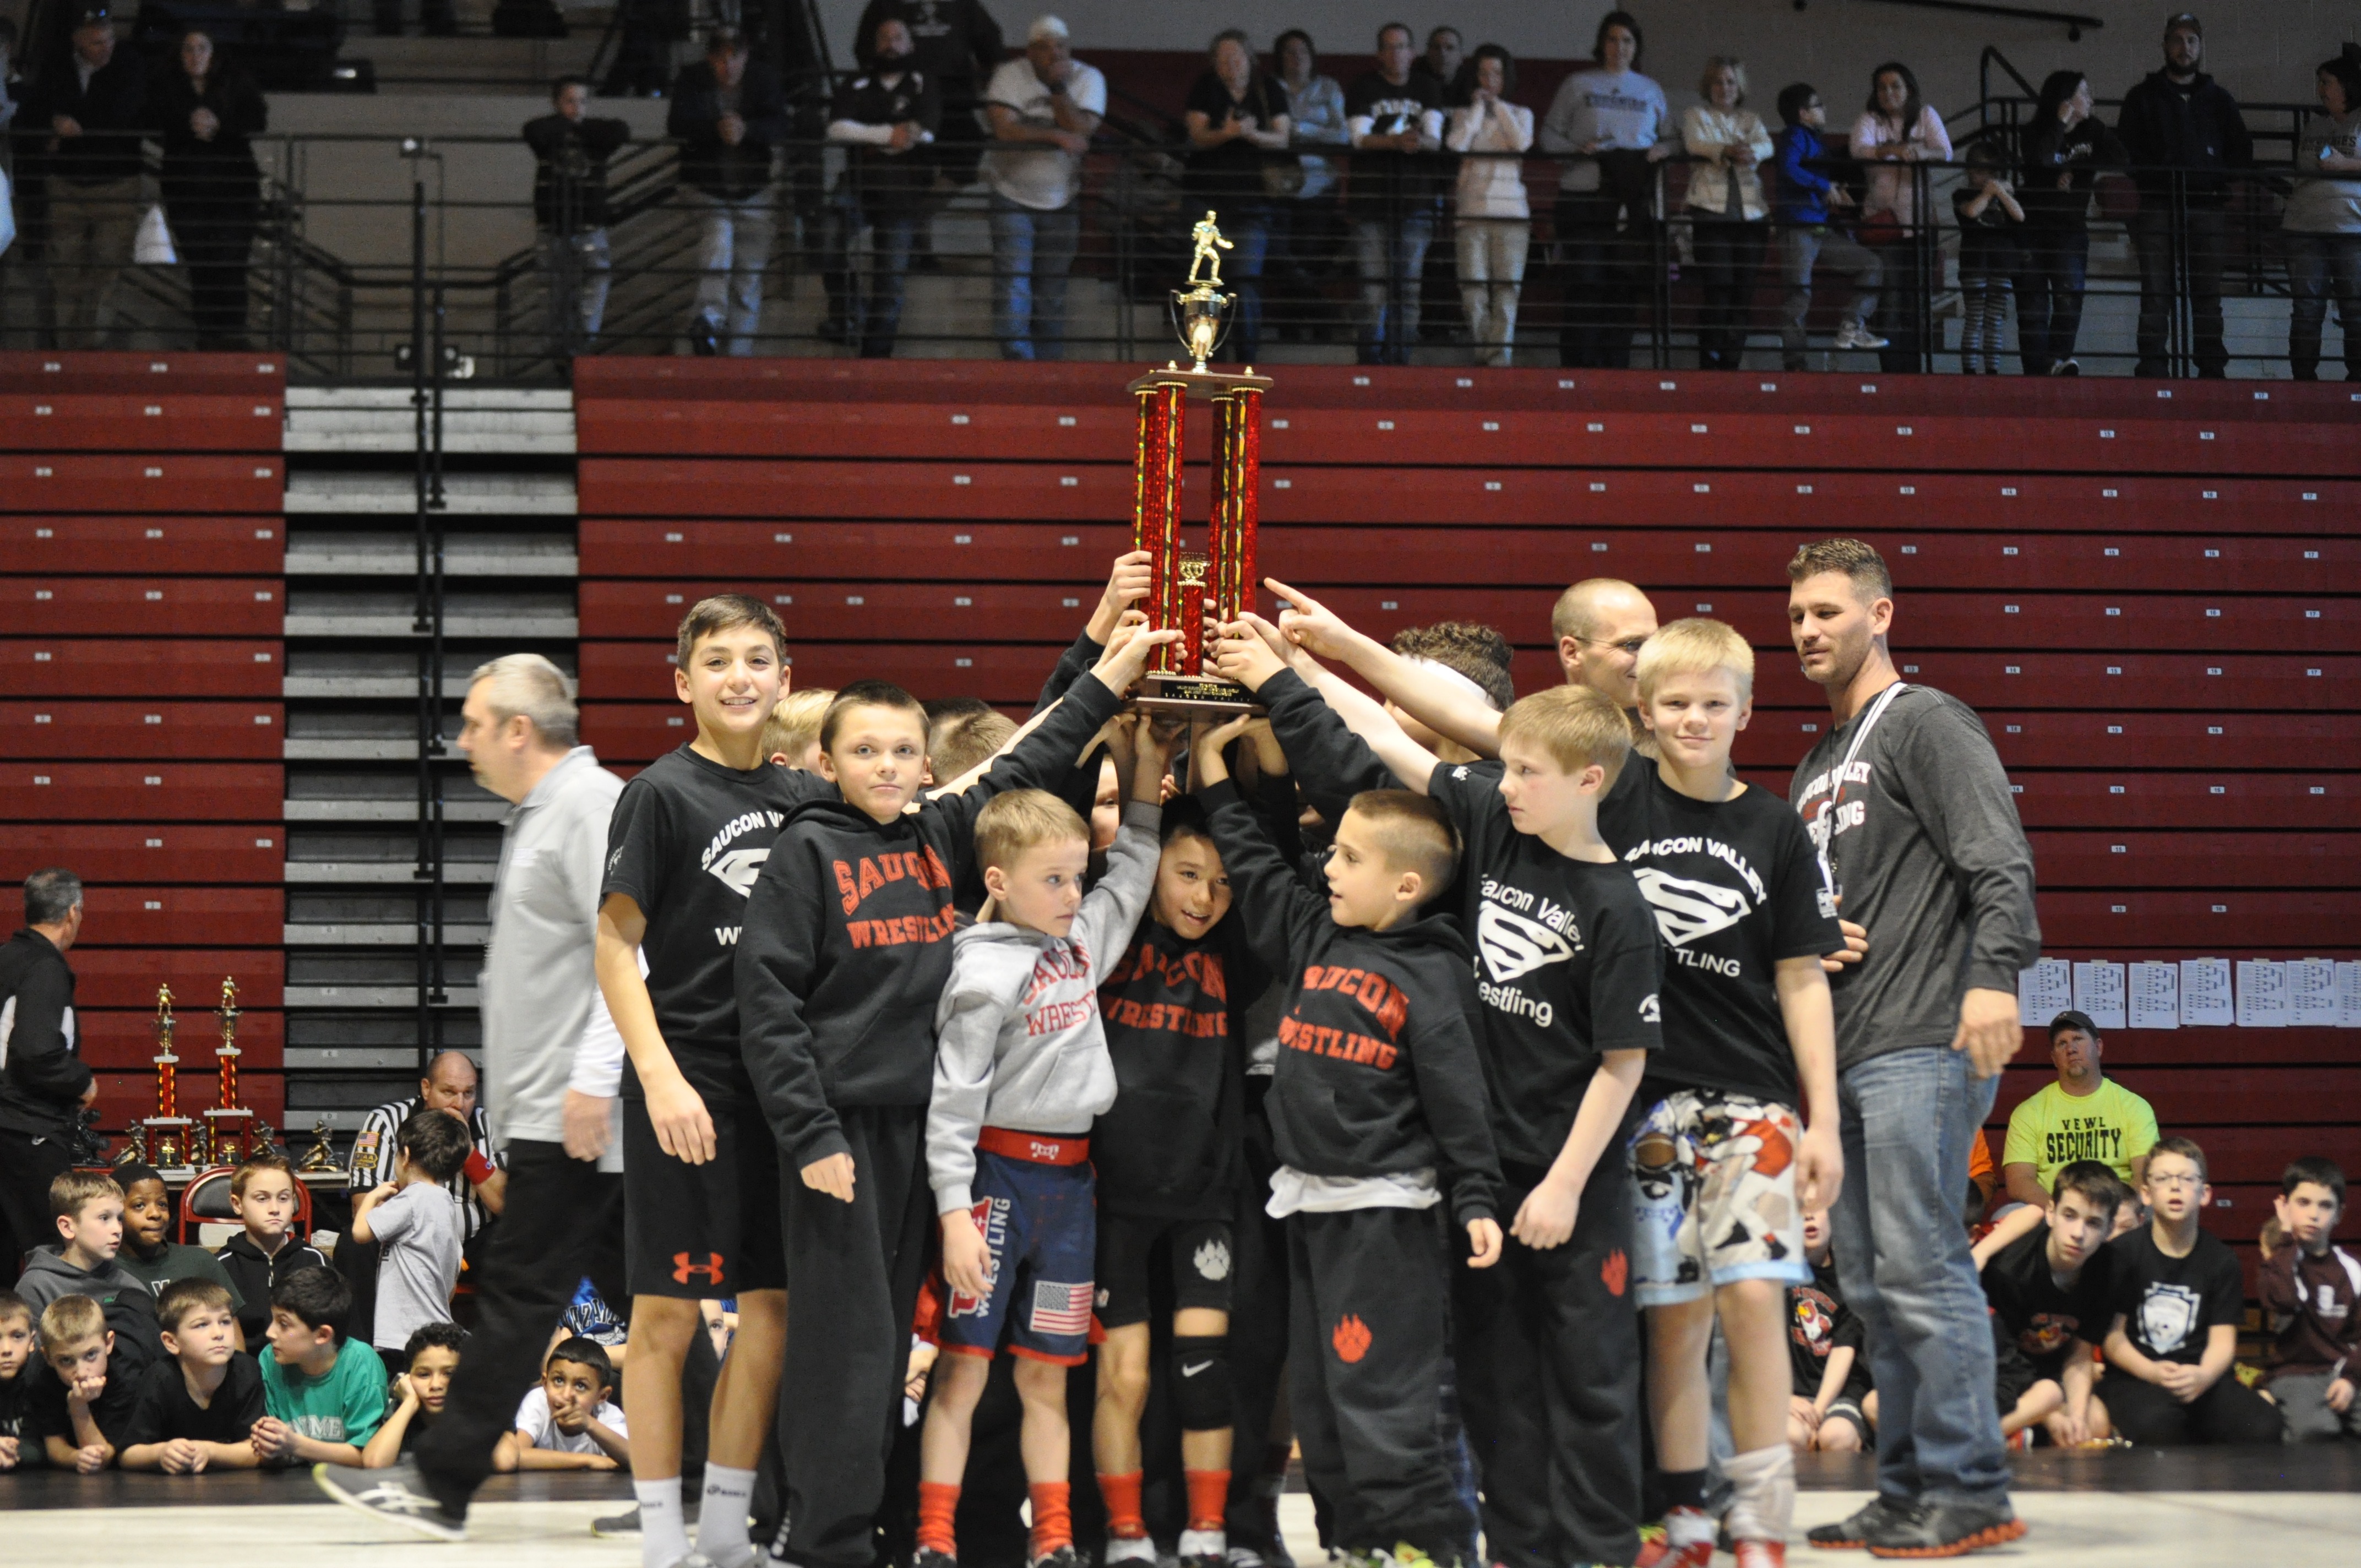 The Saucon valley youth wrestlers won the 2016 VEWL championship.